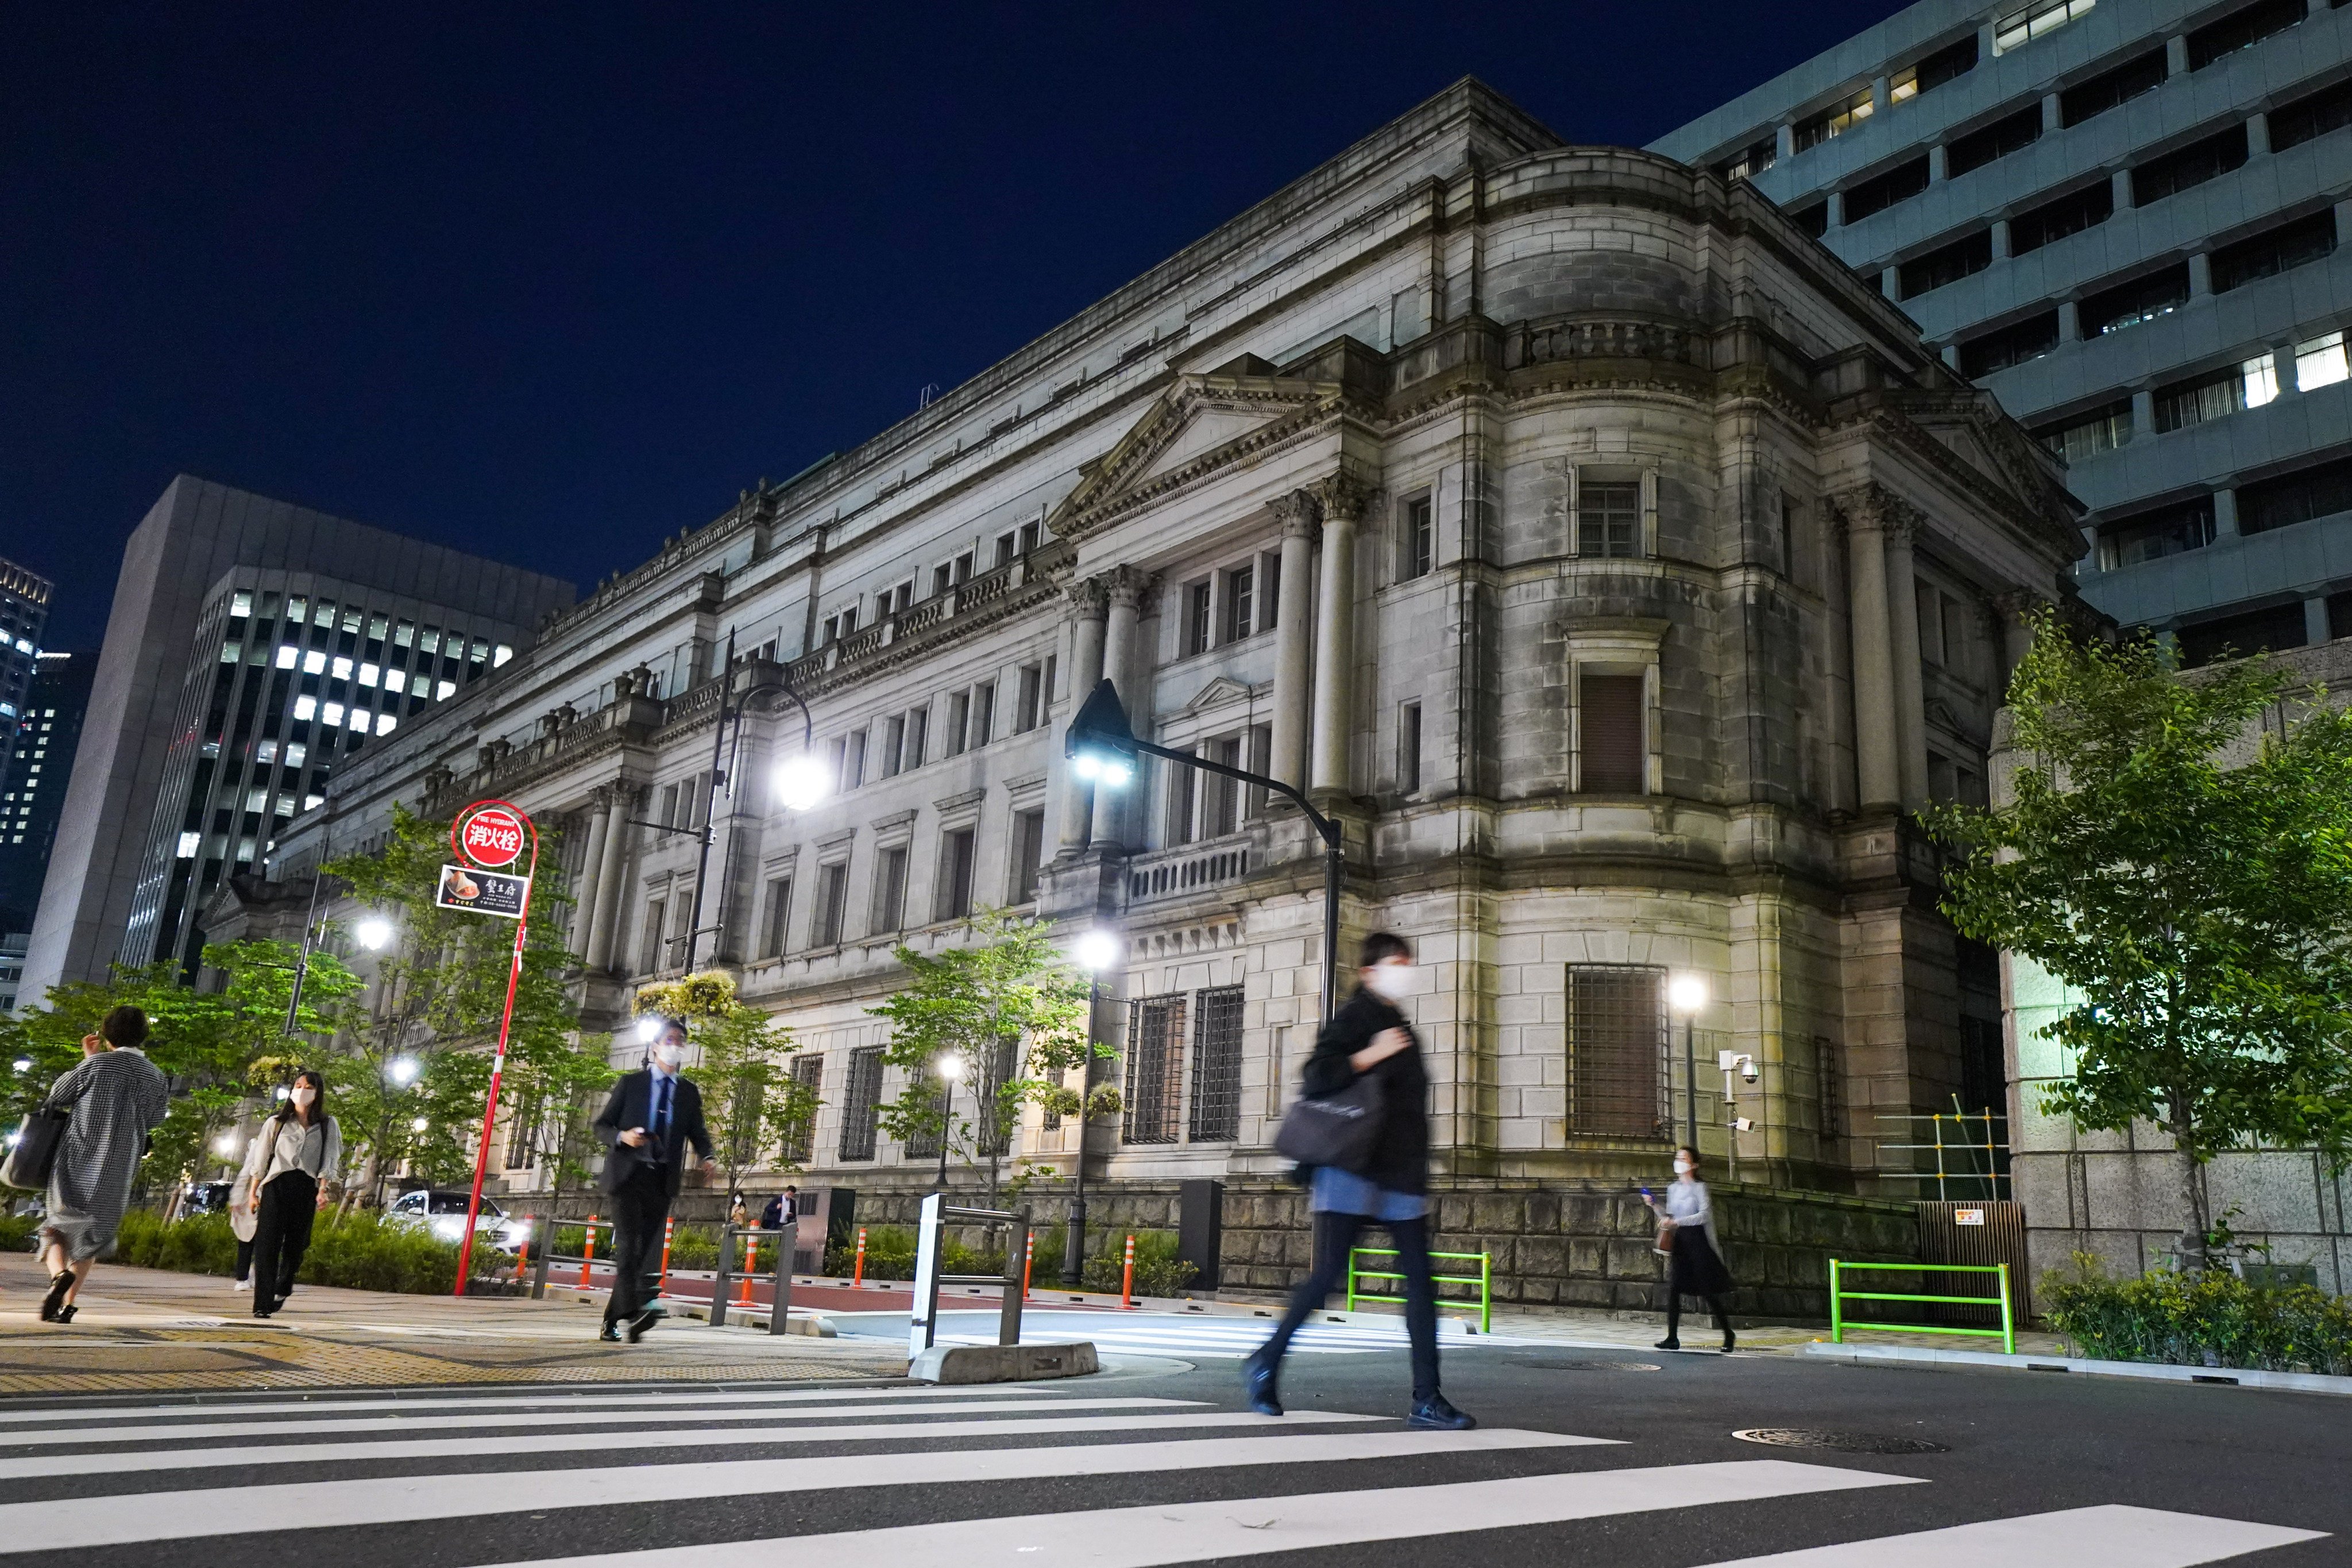 The Bank of Japan headquarters in Tokyo. Despite global inflation, Japan has no plans to tighten its monetary policy. Photo: Bloomberg